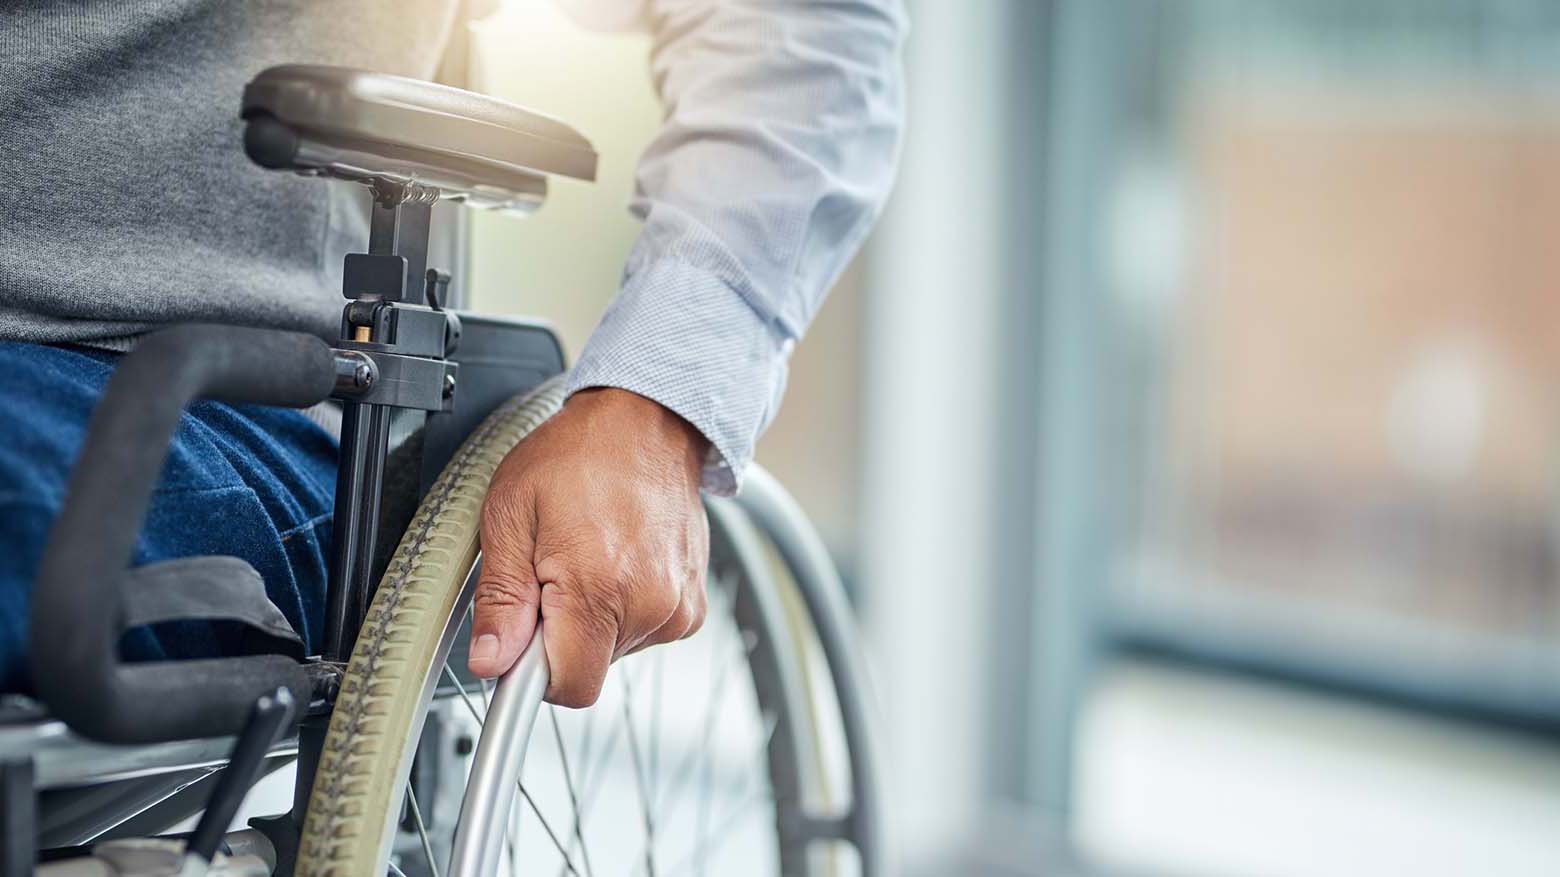 Close up of a man's hand on the wheel of the wheelchair he's sitting in